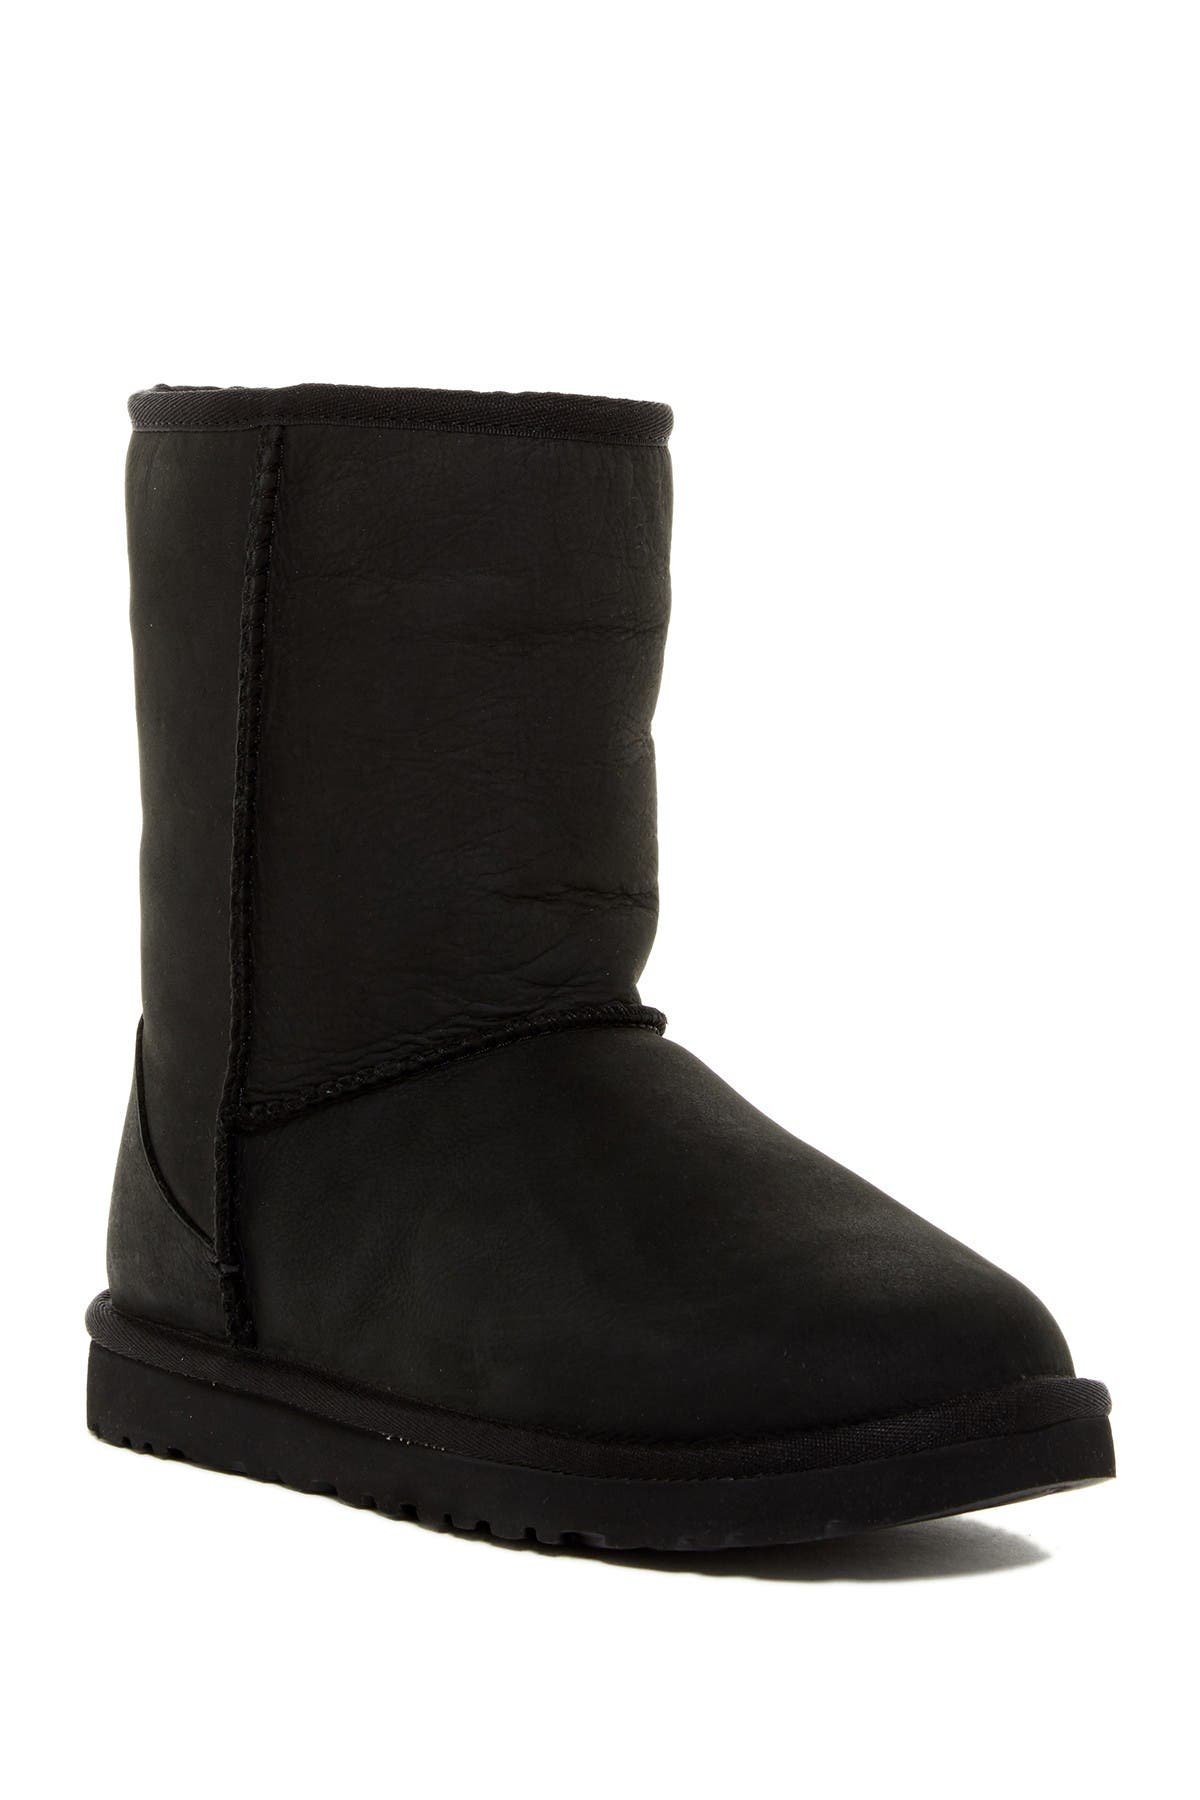 UGG | Classic Short Wool Lined Leather Boot | Nordstrom Rack